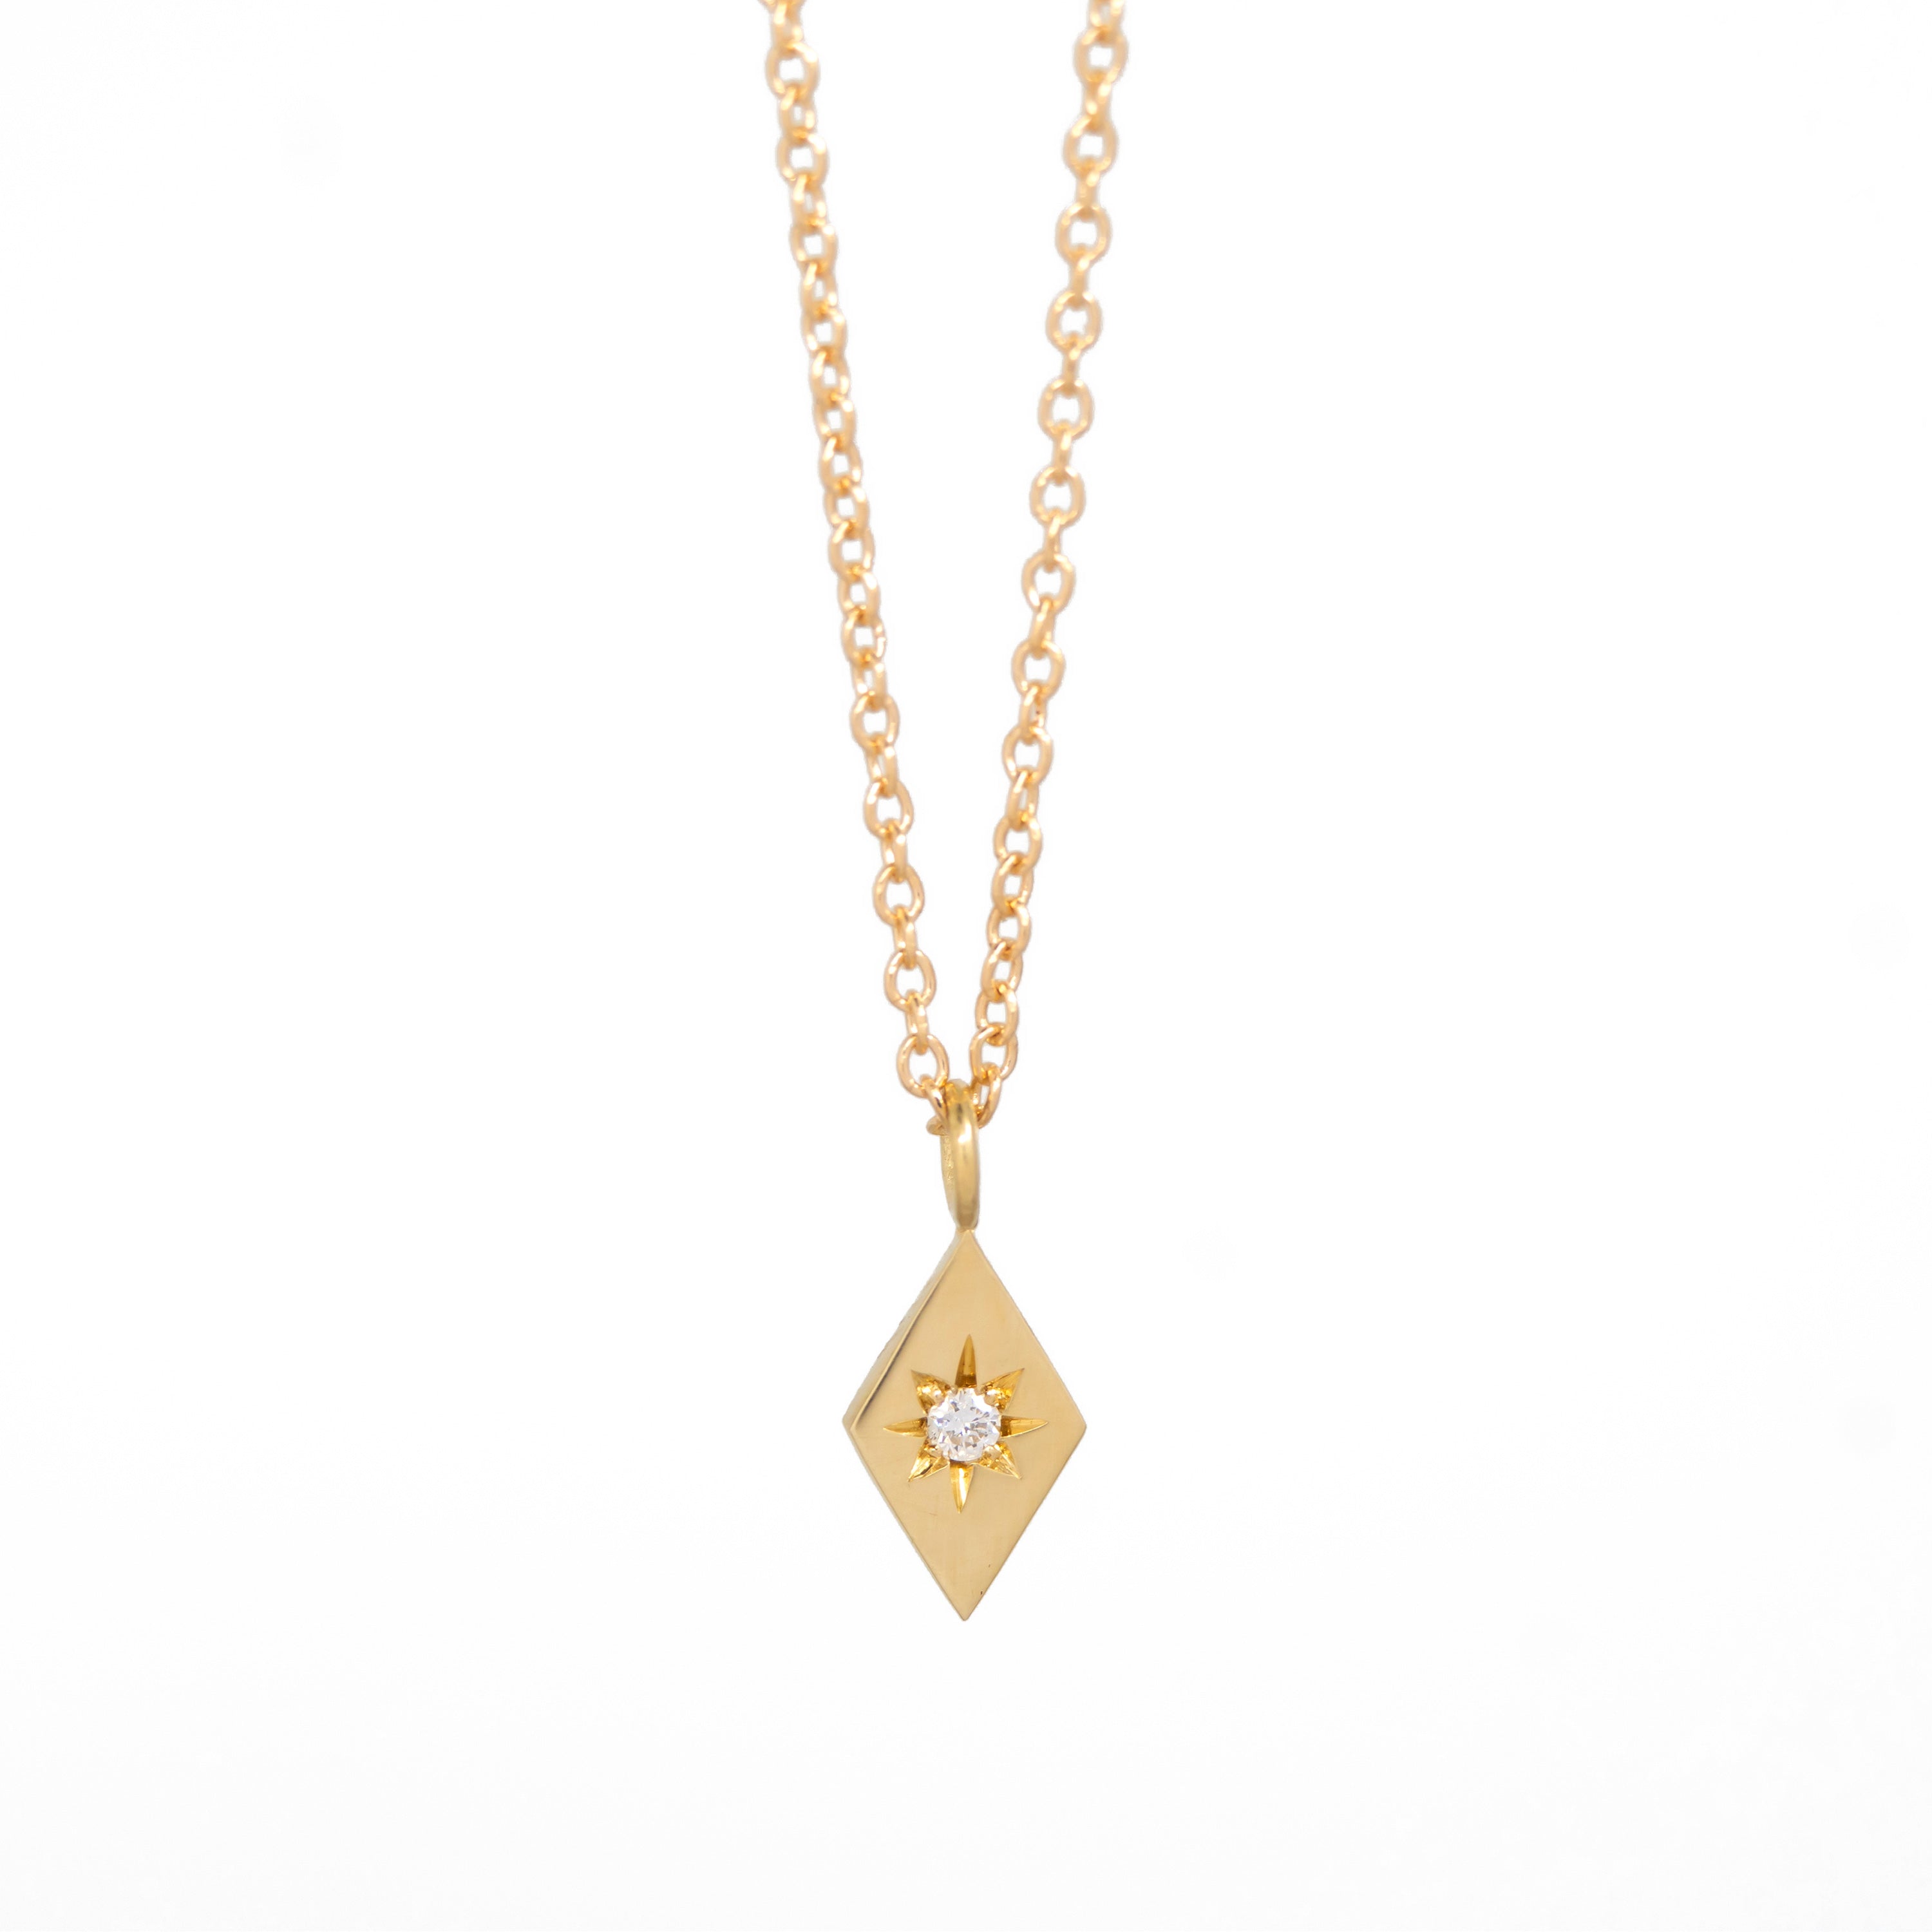 North Star Necklace – Luv Mei